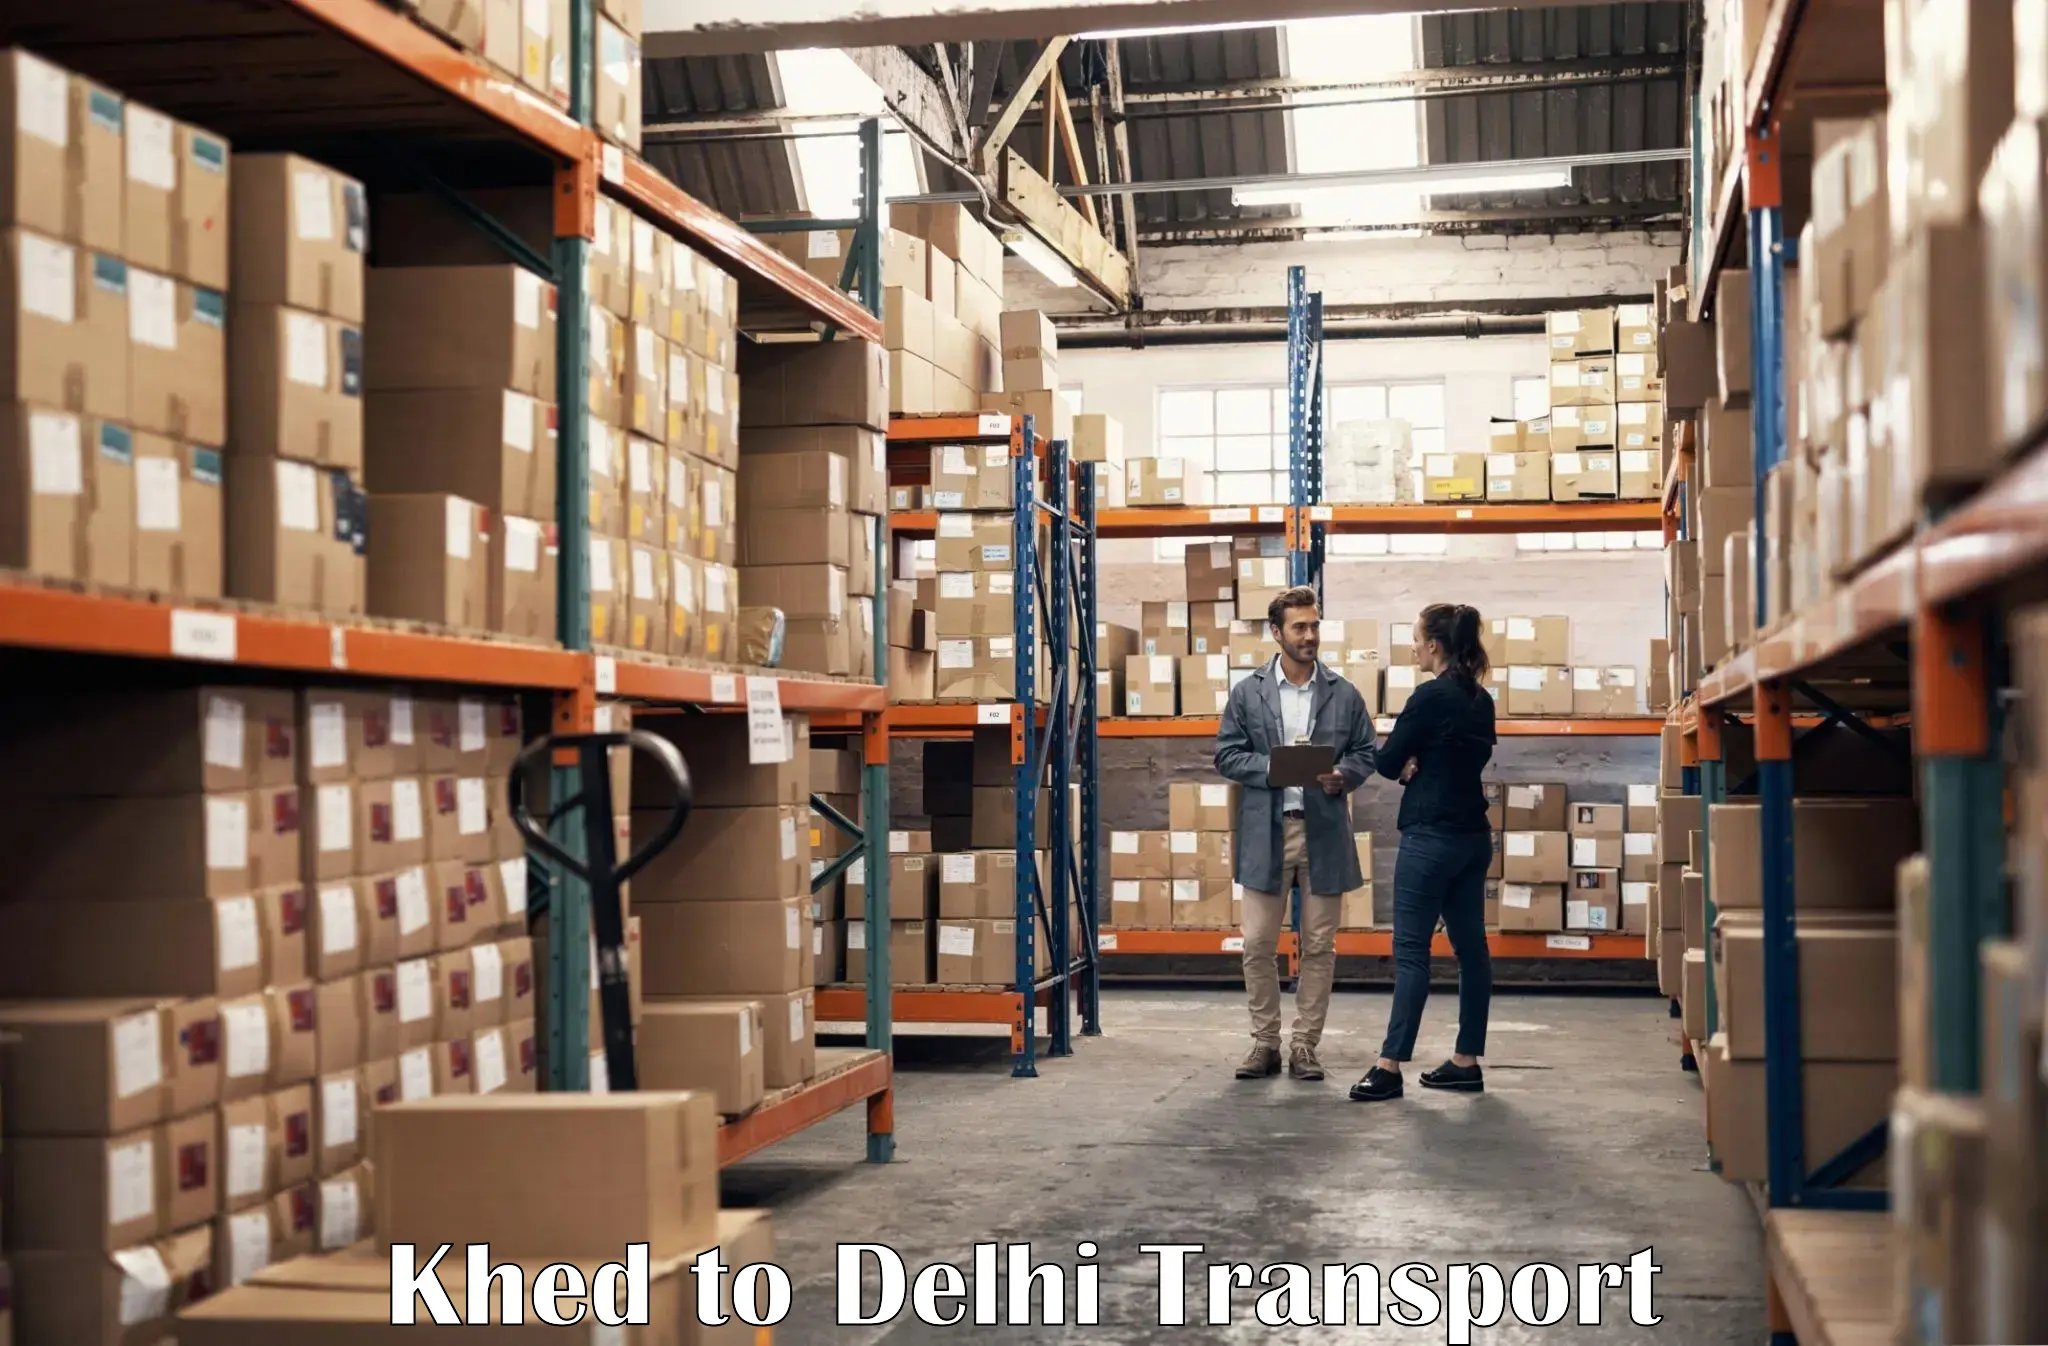 Cycle transportation service Khed to Delhi